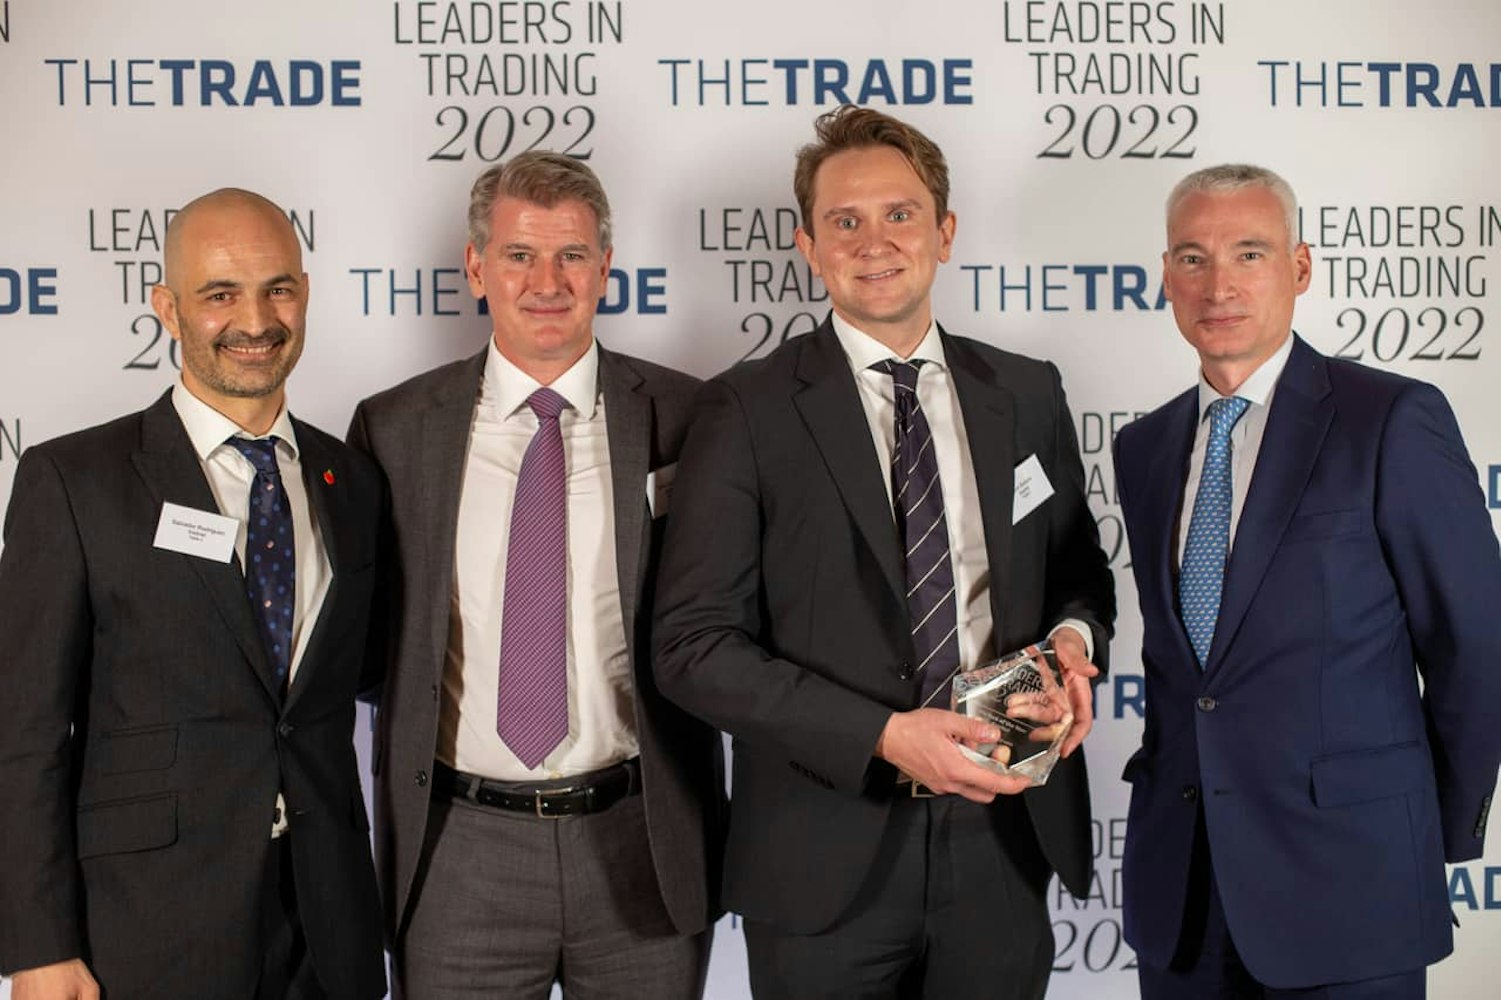 Appital wins “Fintech of the Year” at The Trade ‘Leaders in Trading’ Awards